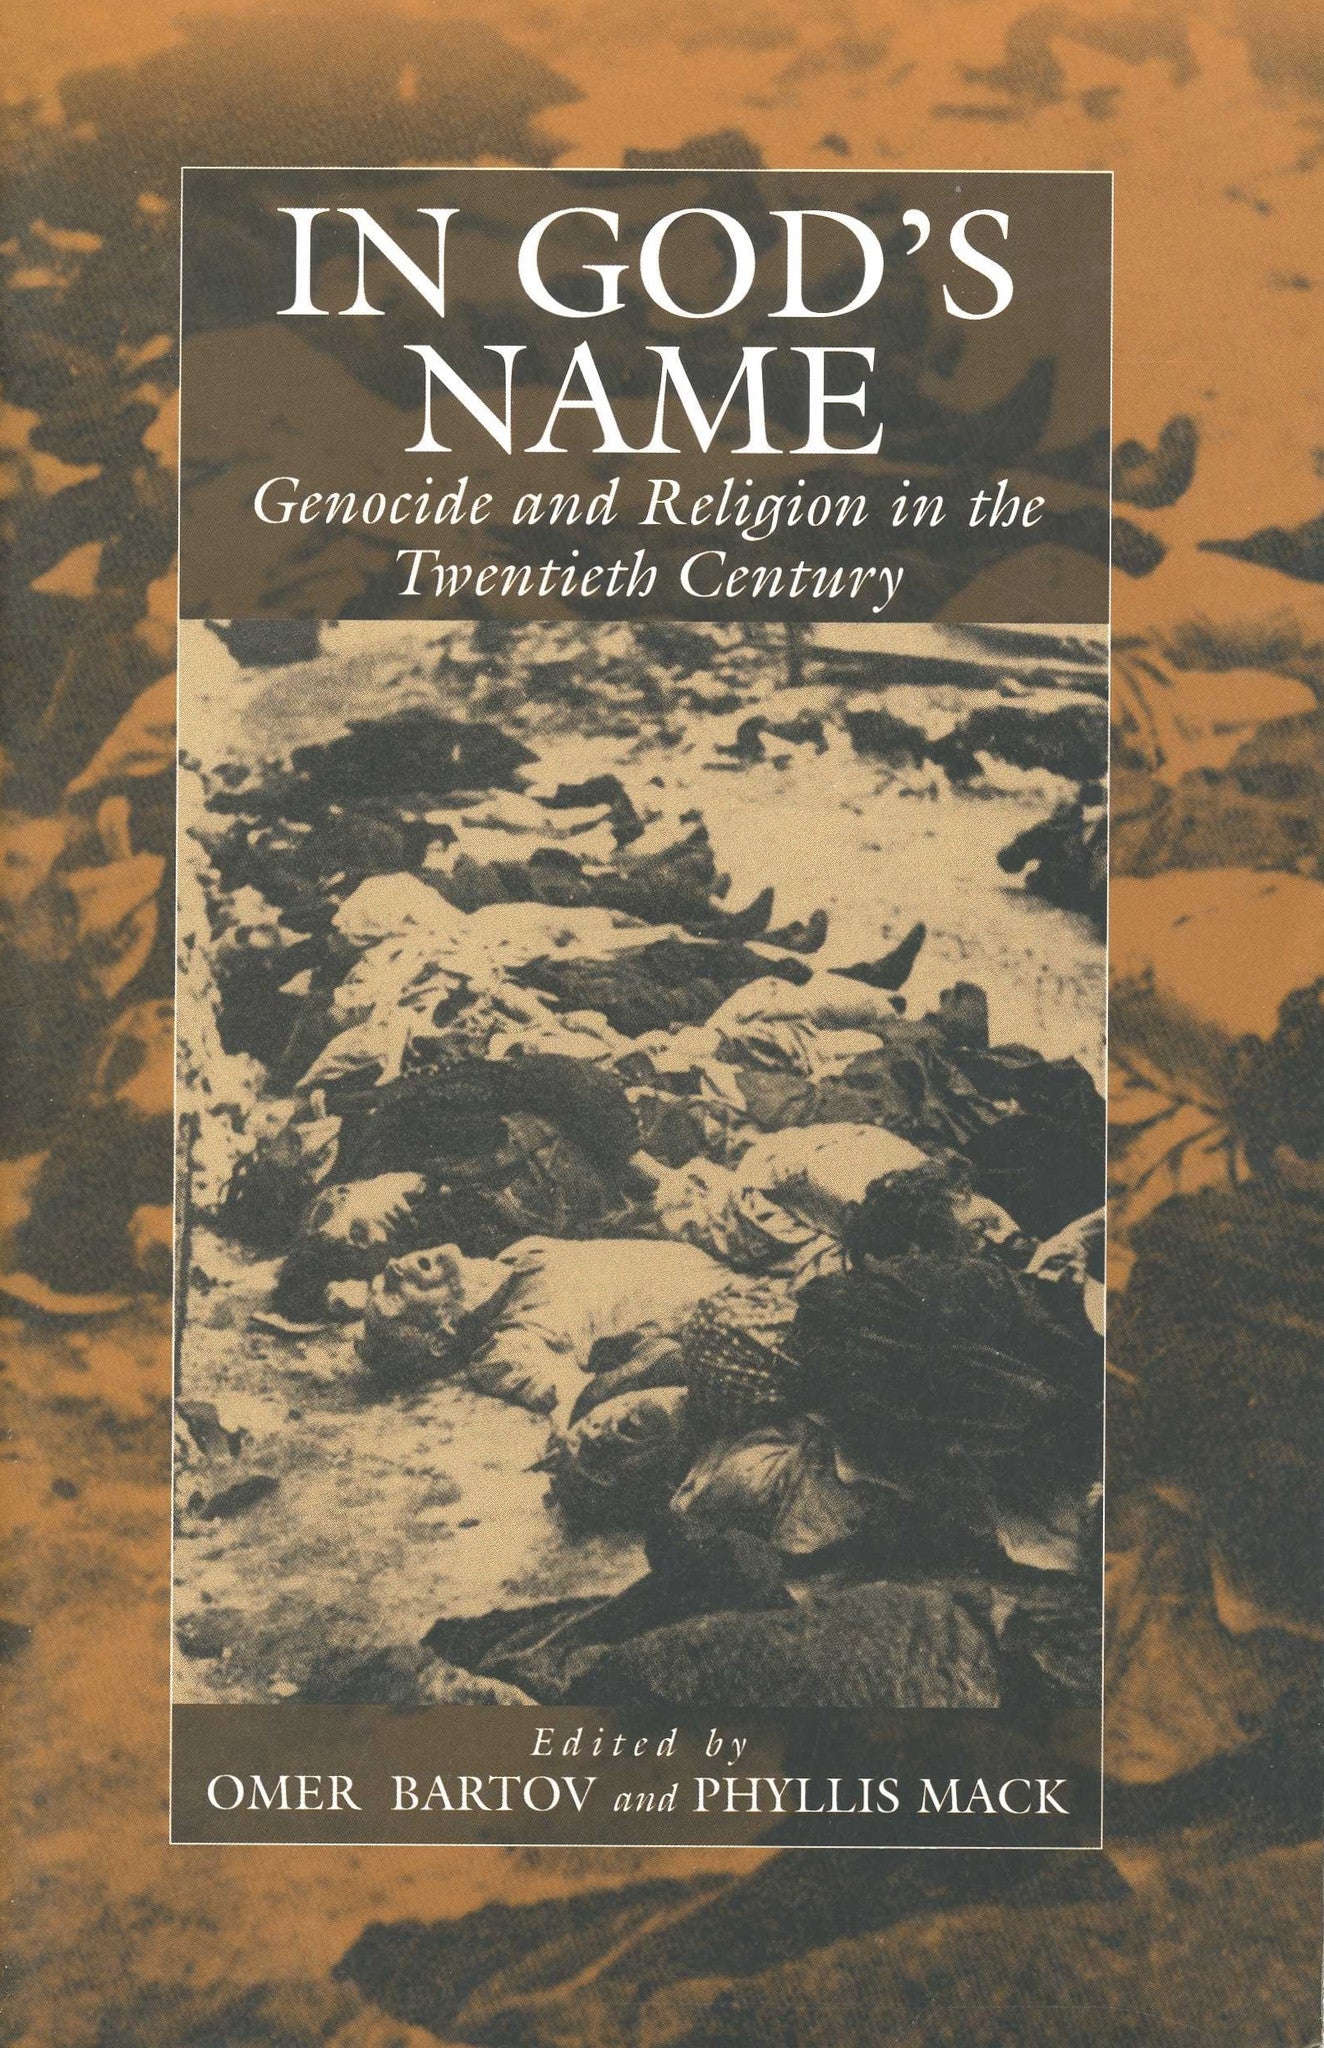 IN GOD'S NAME: Genocide and Religion in the Twentieth Century